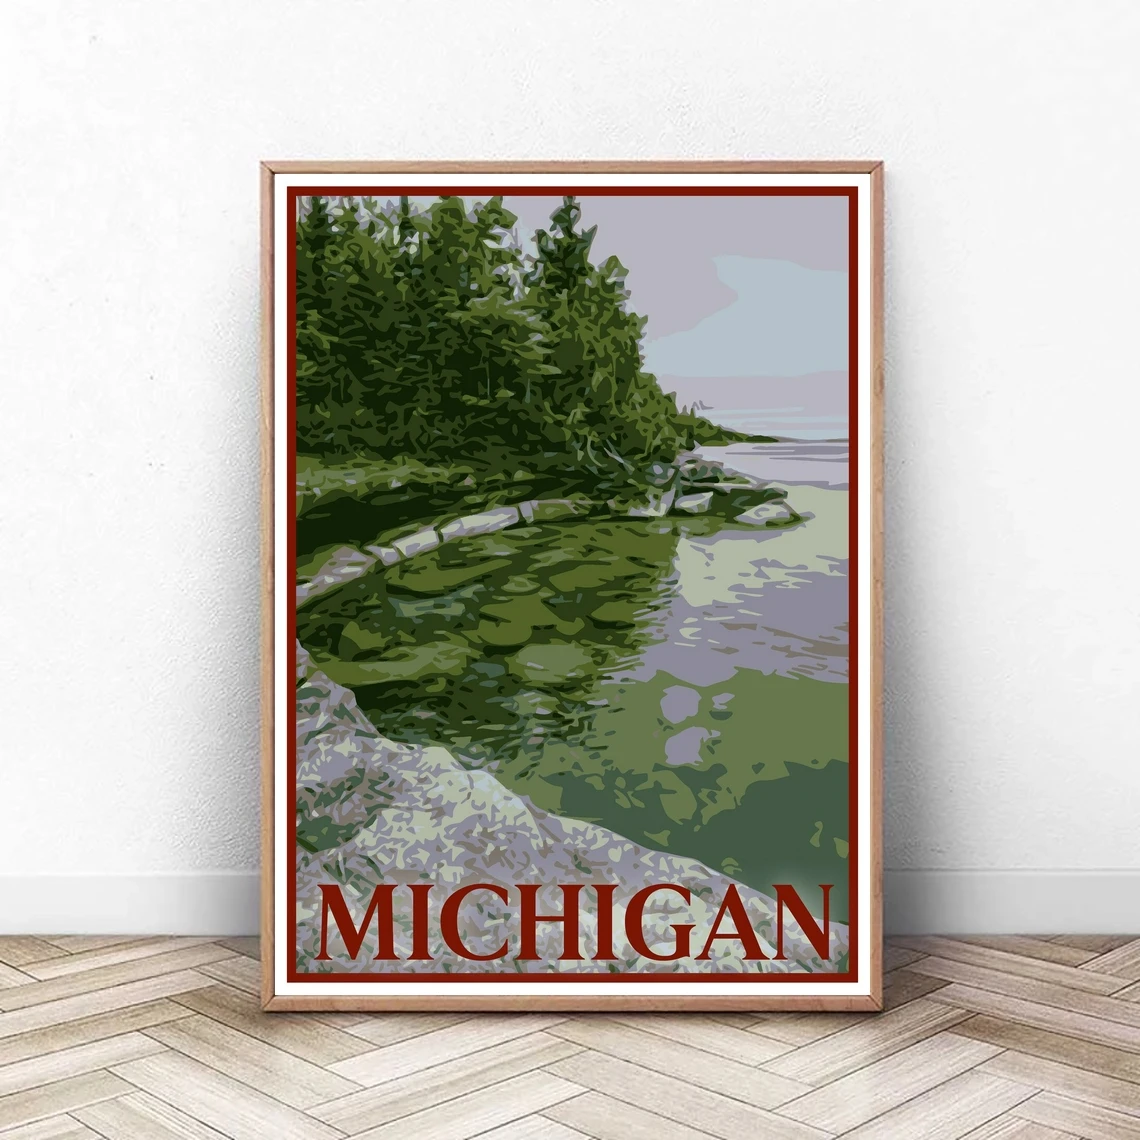 

Michigan Travel Poster, Vintage Style Poster,Home, Wall Art, Travel, Vacation, Home State, Souvenir, Frame Not Included